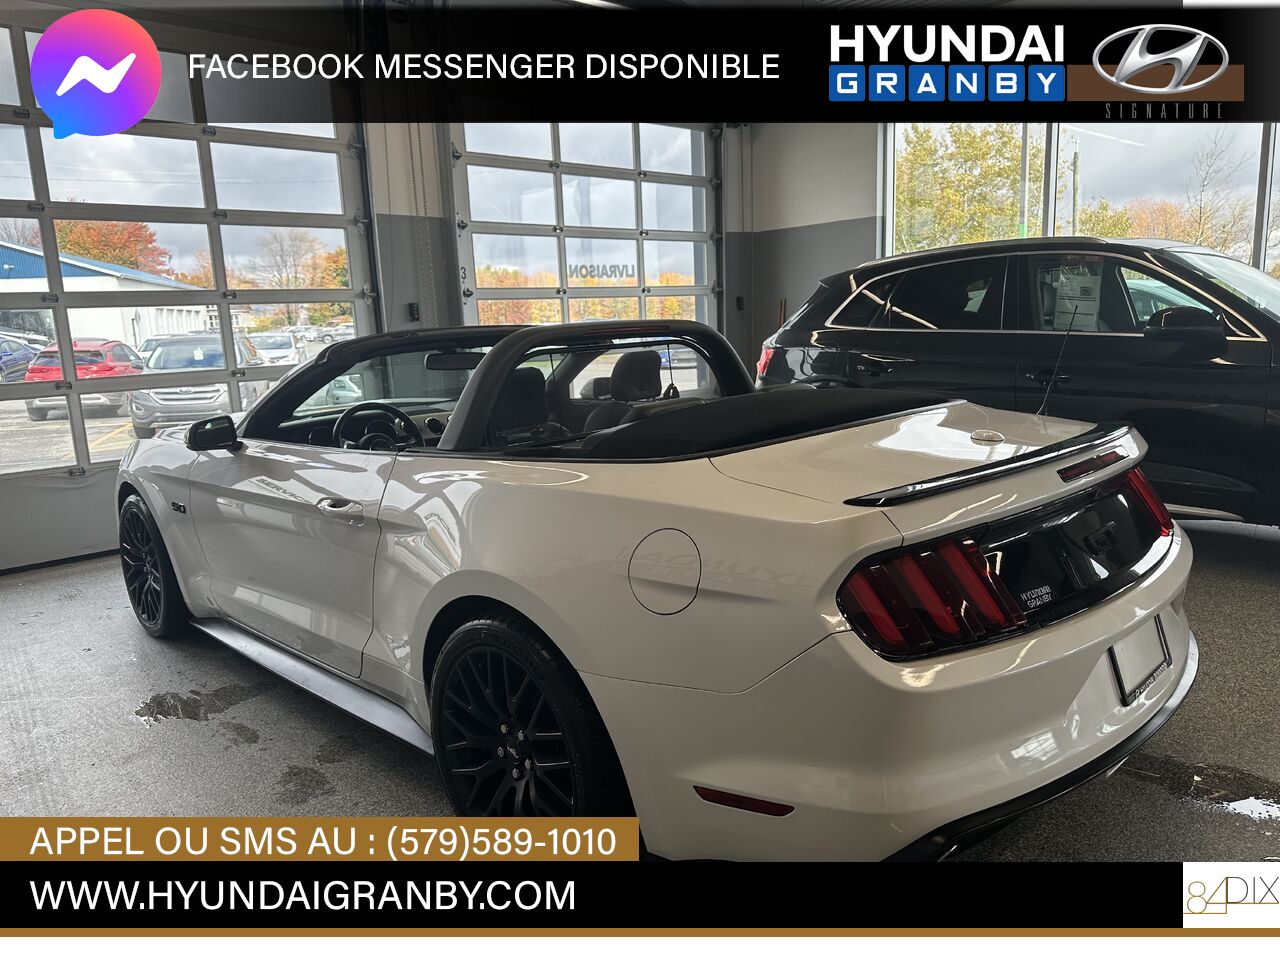 2017 Ford Mustang Granby - photo #5